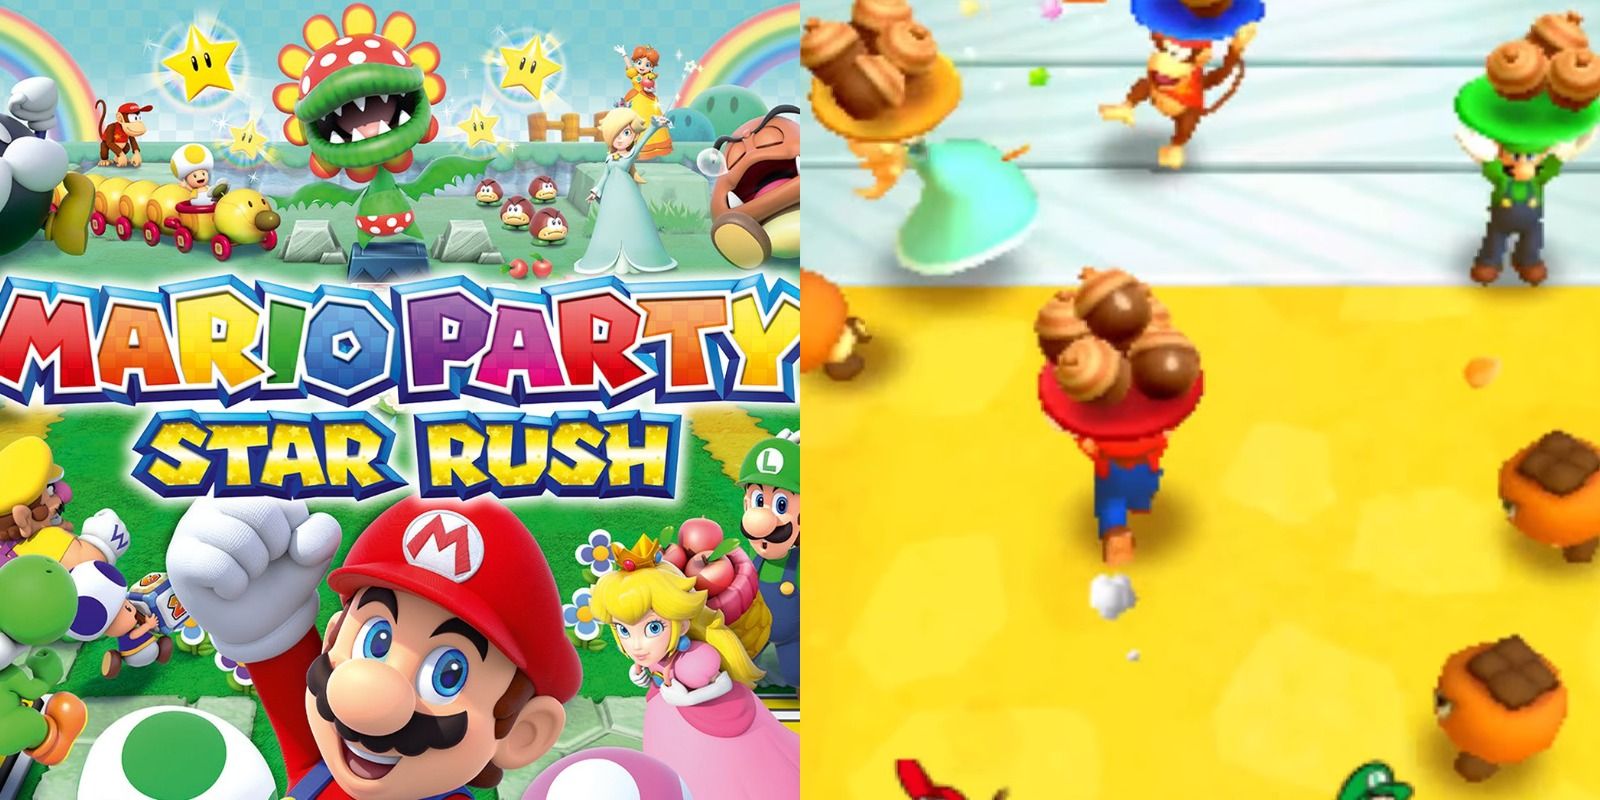 Mario Party Star Rush for the Nintendo 3DS